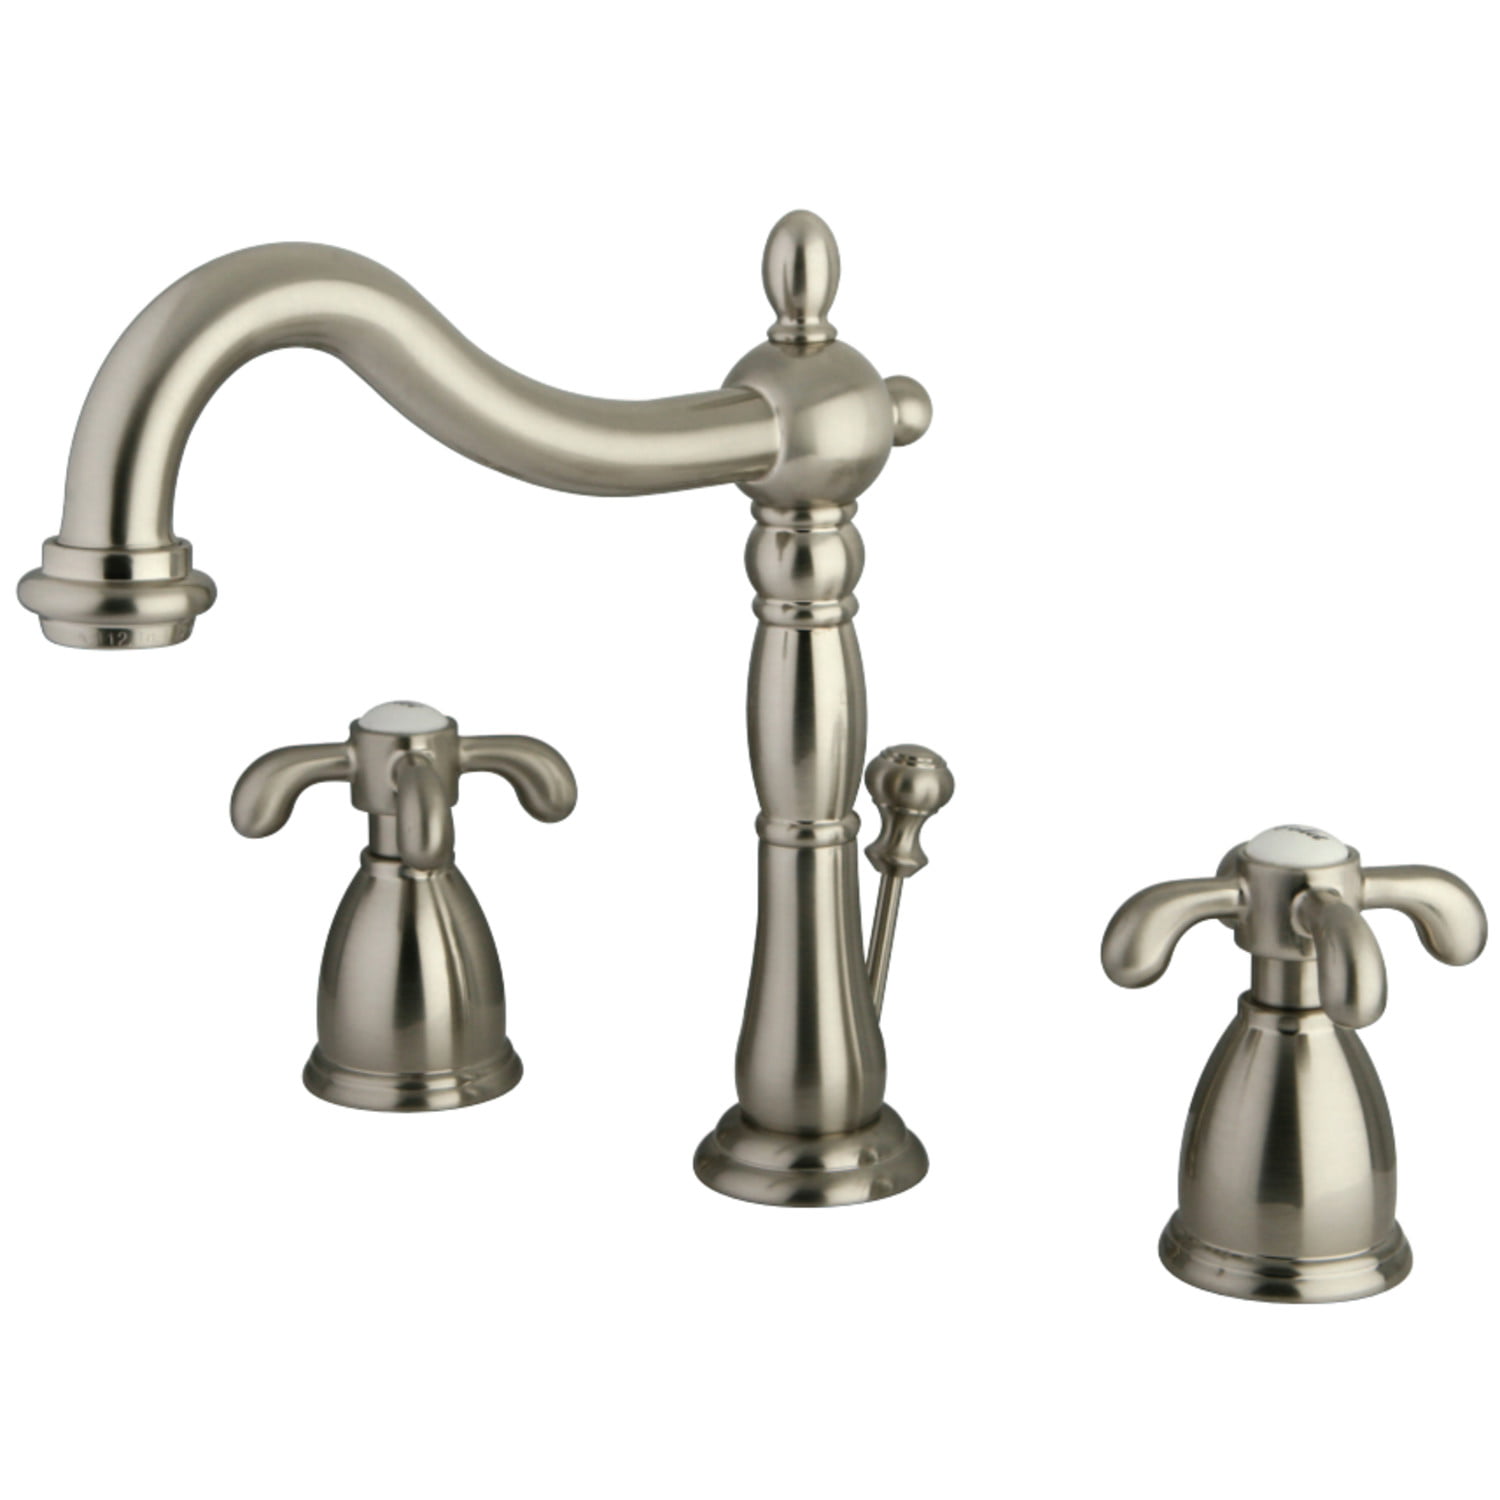 Kingston Brass KB1978TX French Country Widespread Bathroom Faucet with Plastic Pop-Up, Brushed Nickel